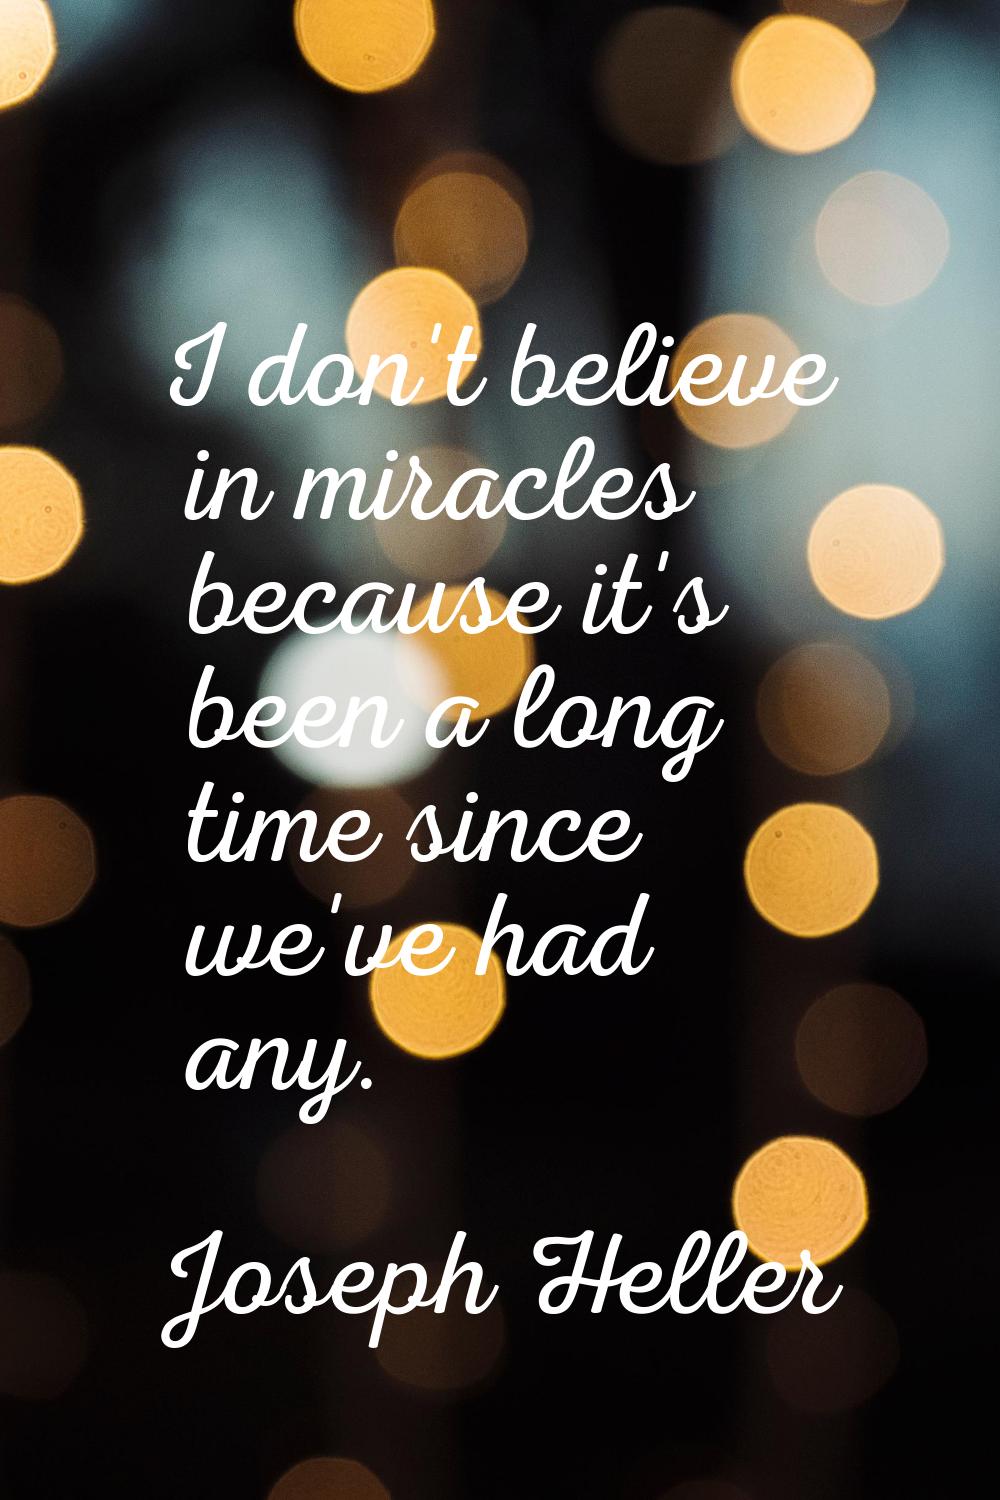 I don't believe in miracles because it's been a long time since we've had any.